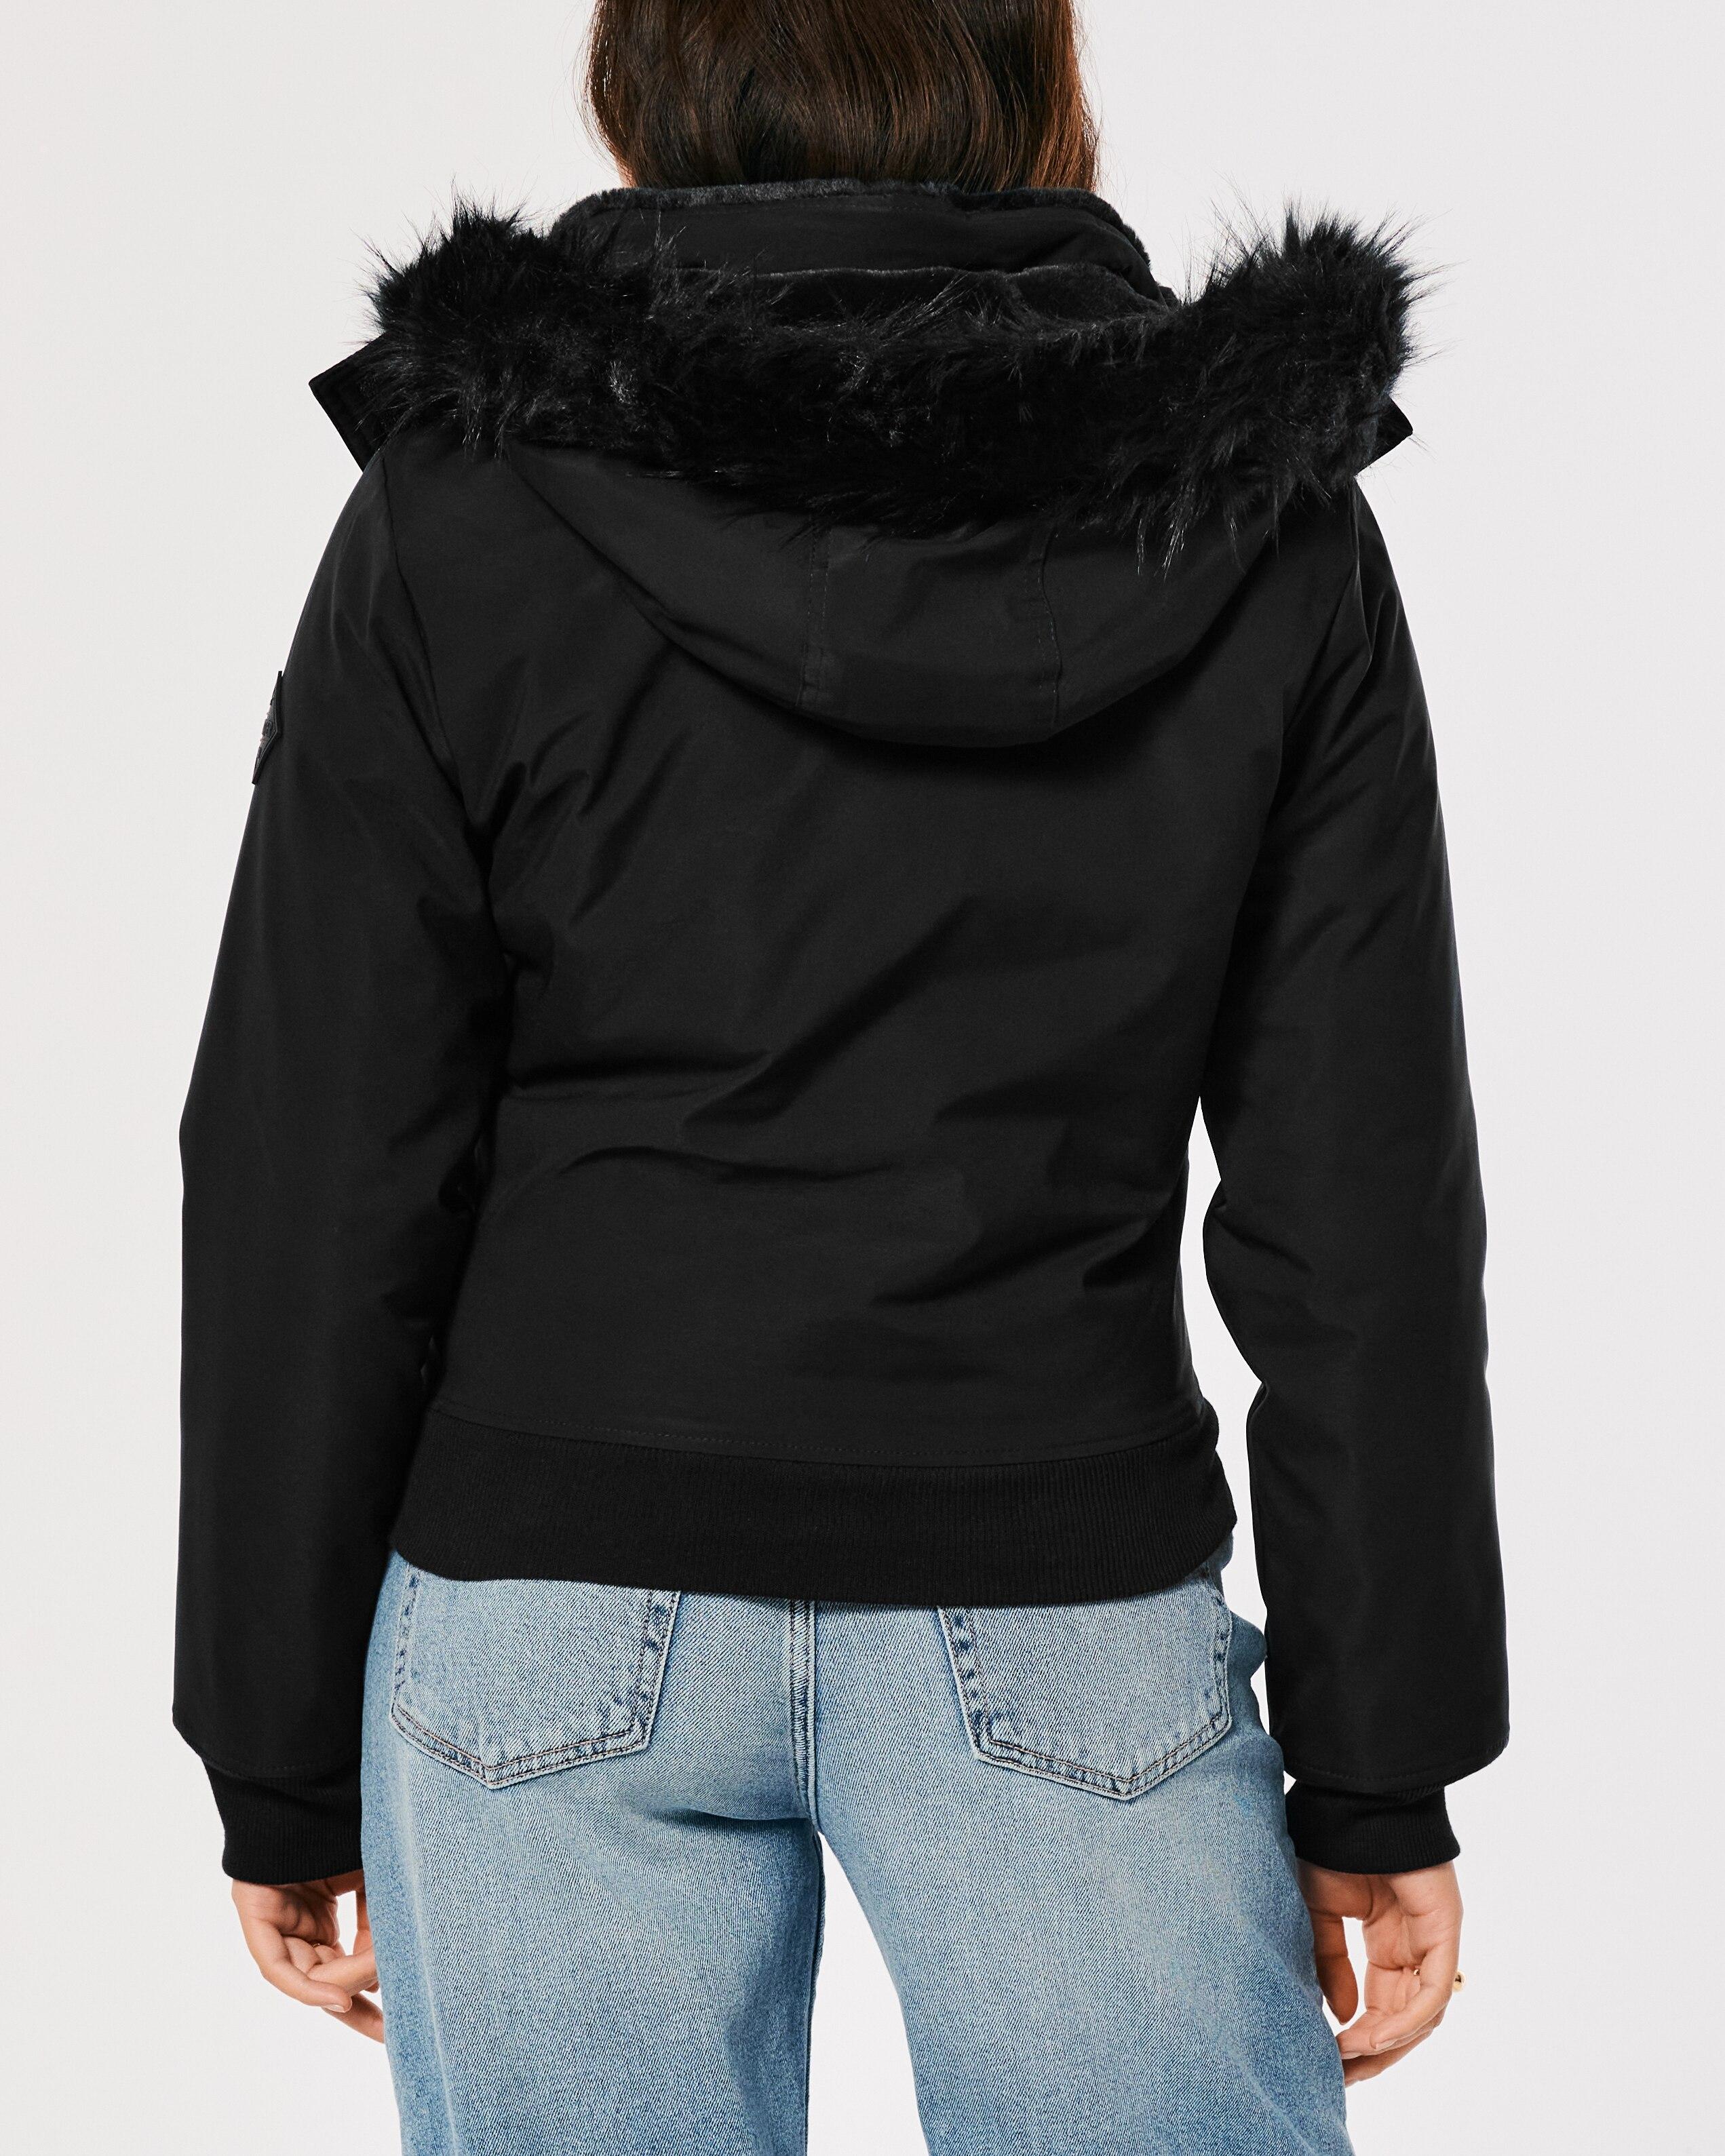 Hollister FAUX FUR-LINED ALL-WEATHER BOMBER JACKET